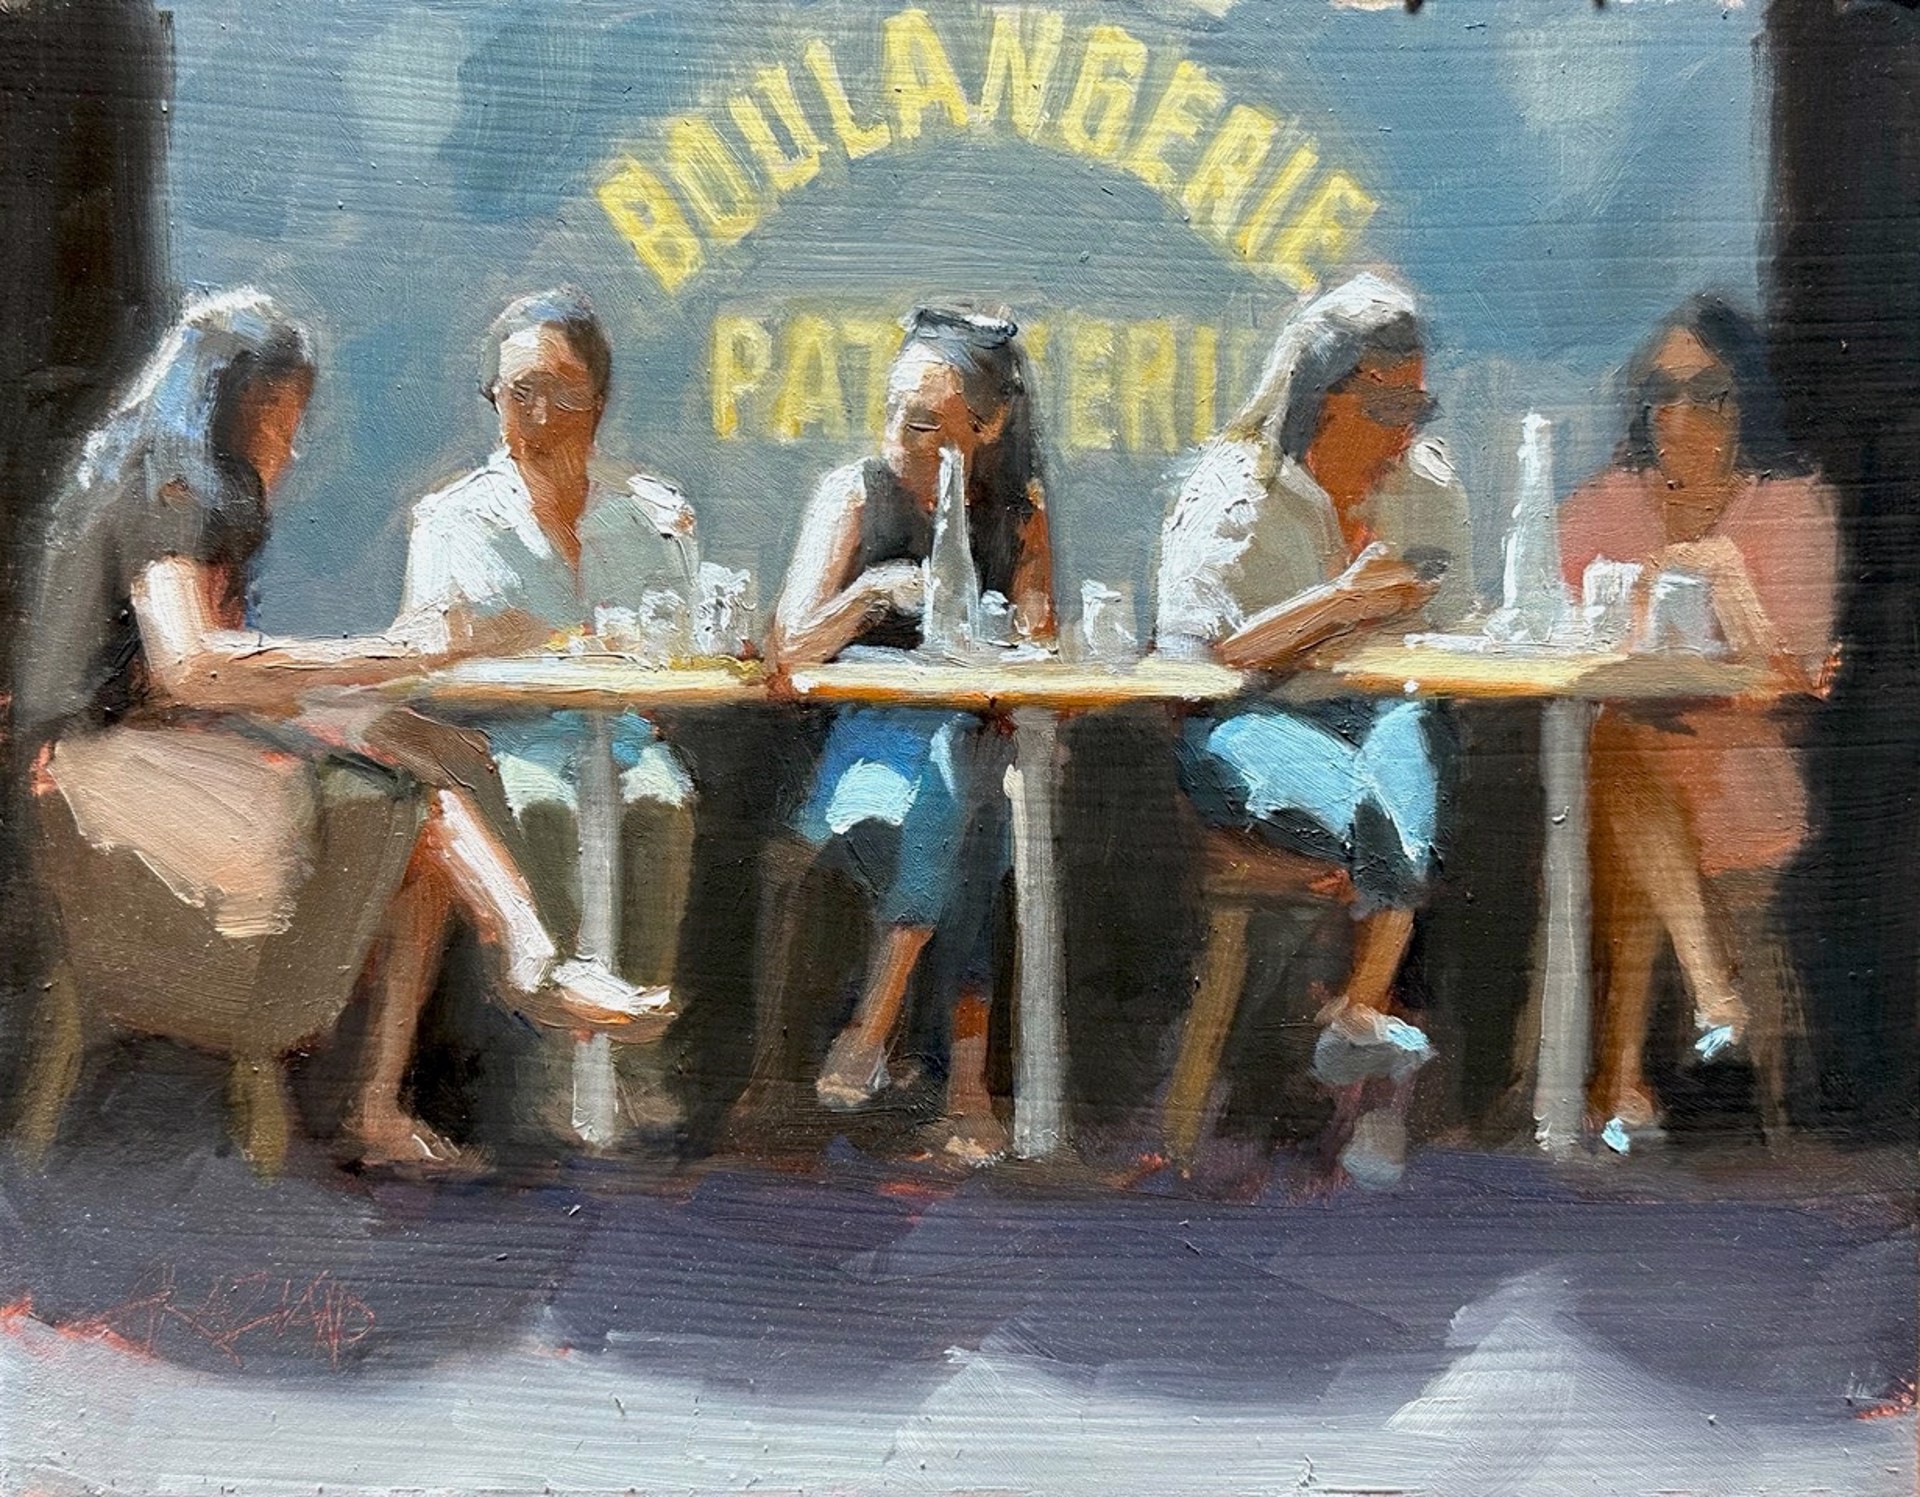 Lunch with the Girls by Dan Graziano